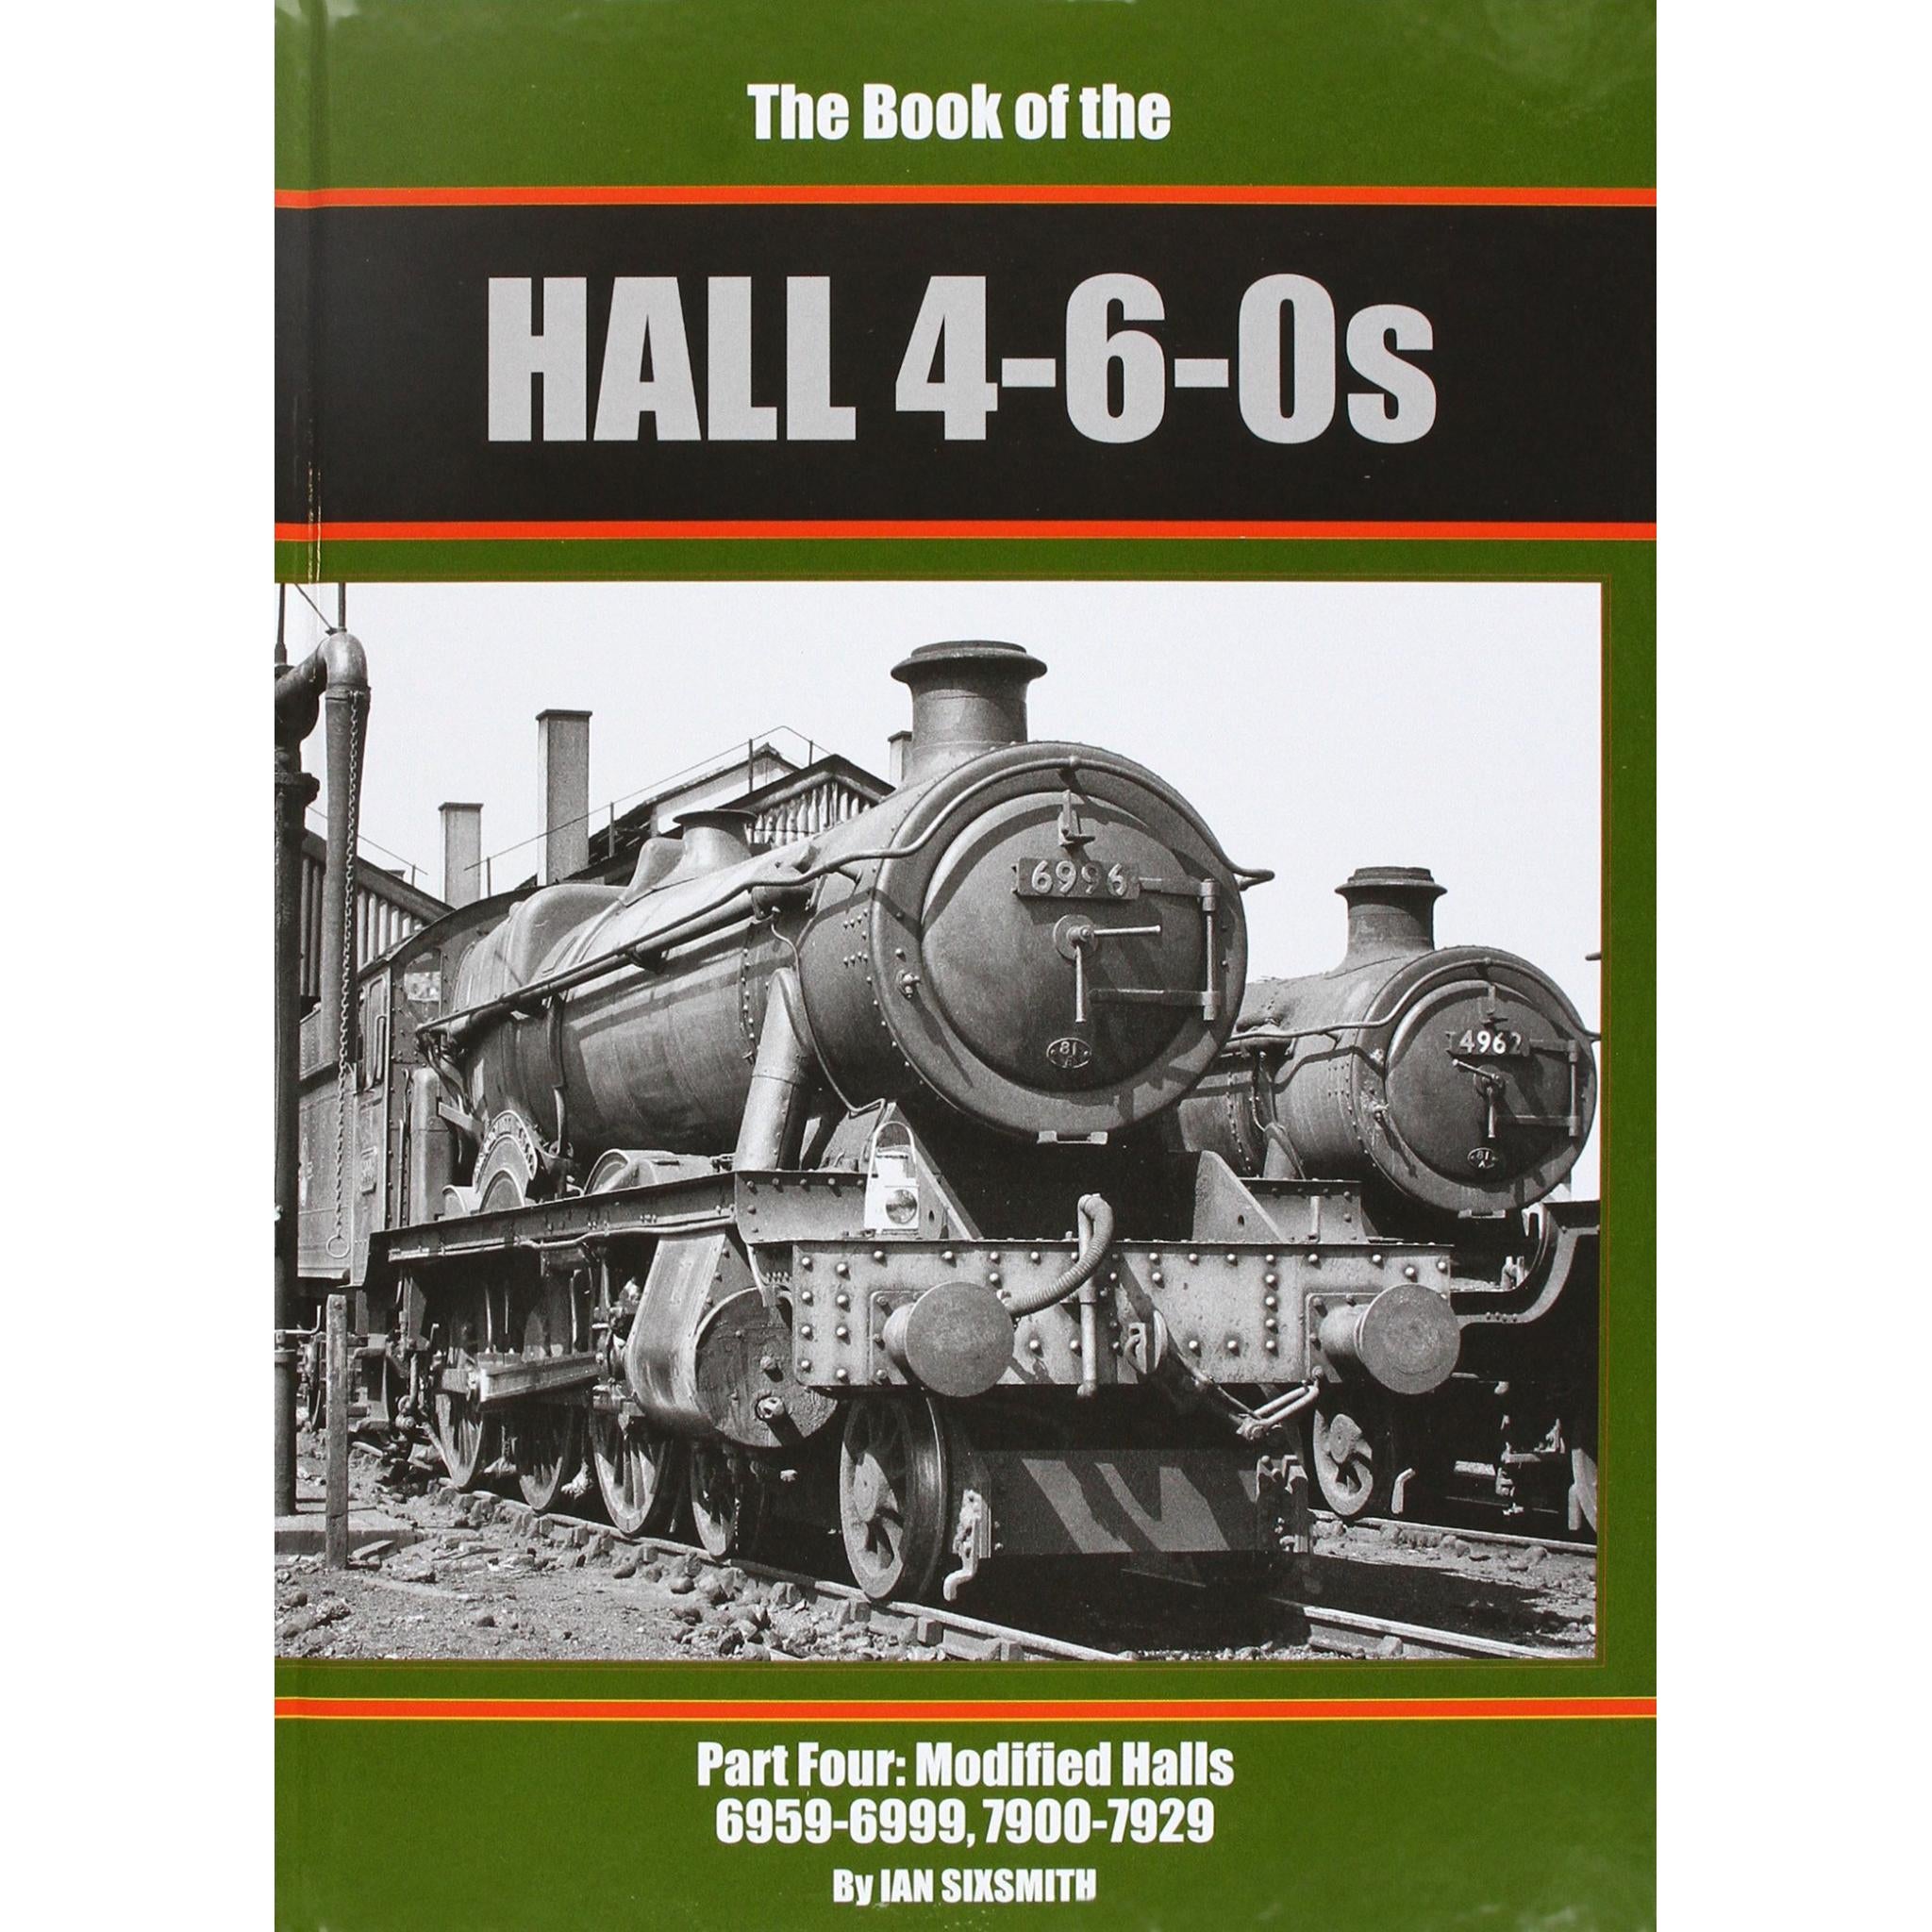 The Book of the HALL 4-6-0s Part 4 6959 - 7929